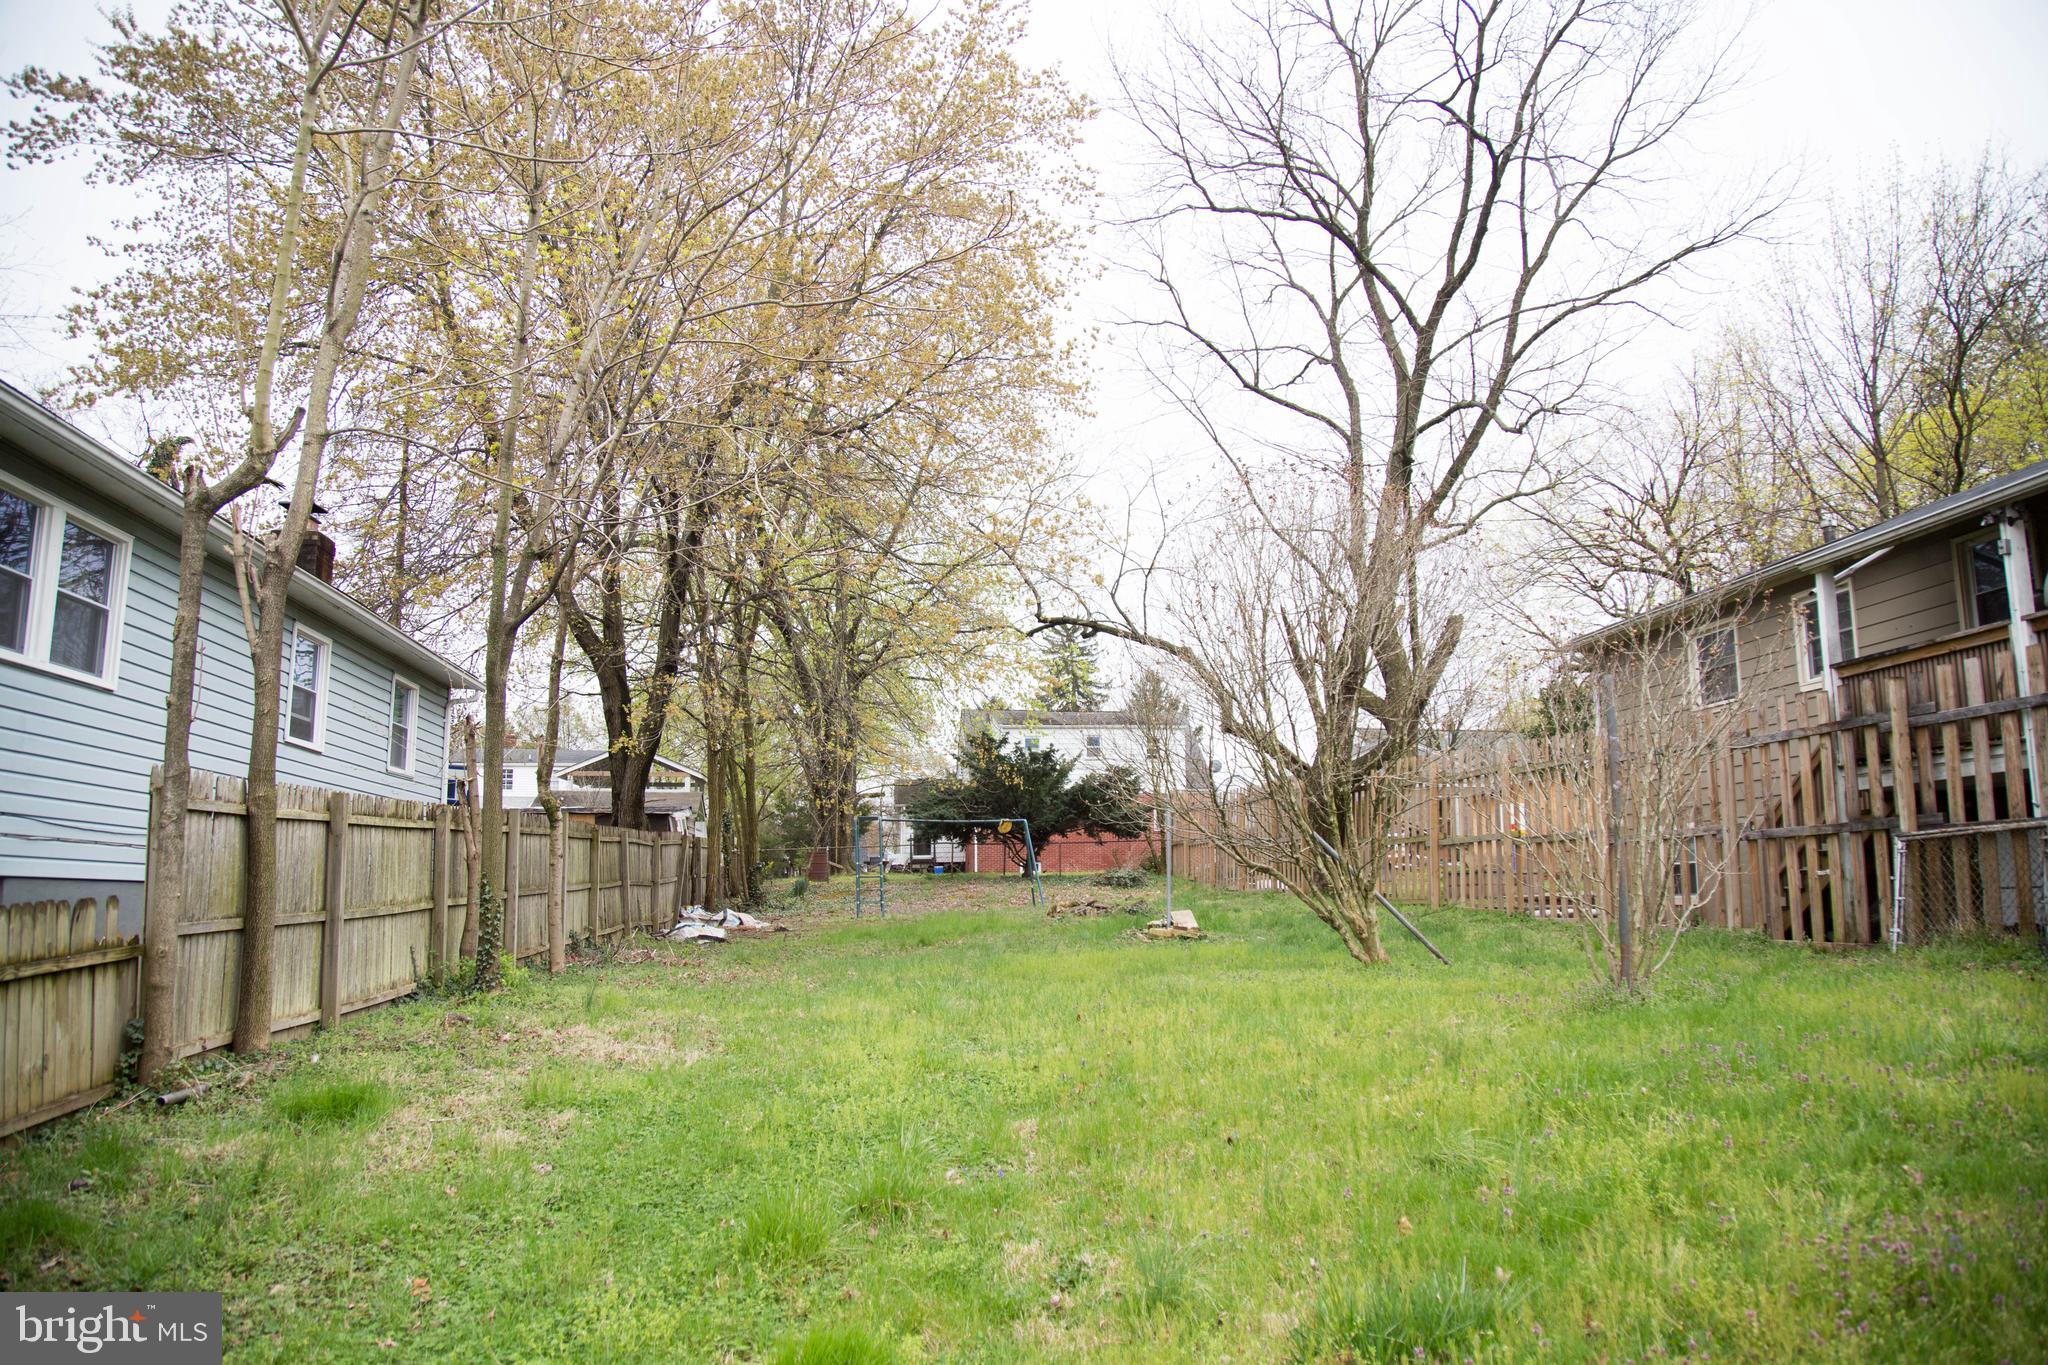 a view of a yard with a large tree